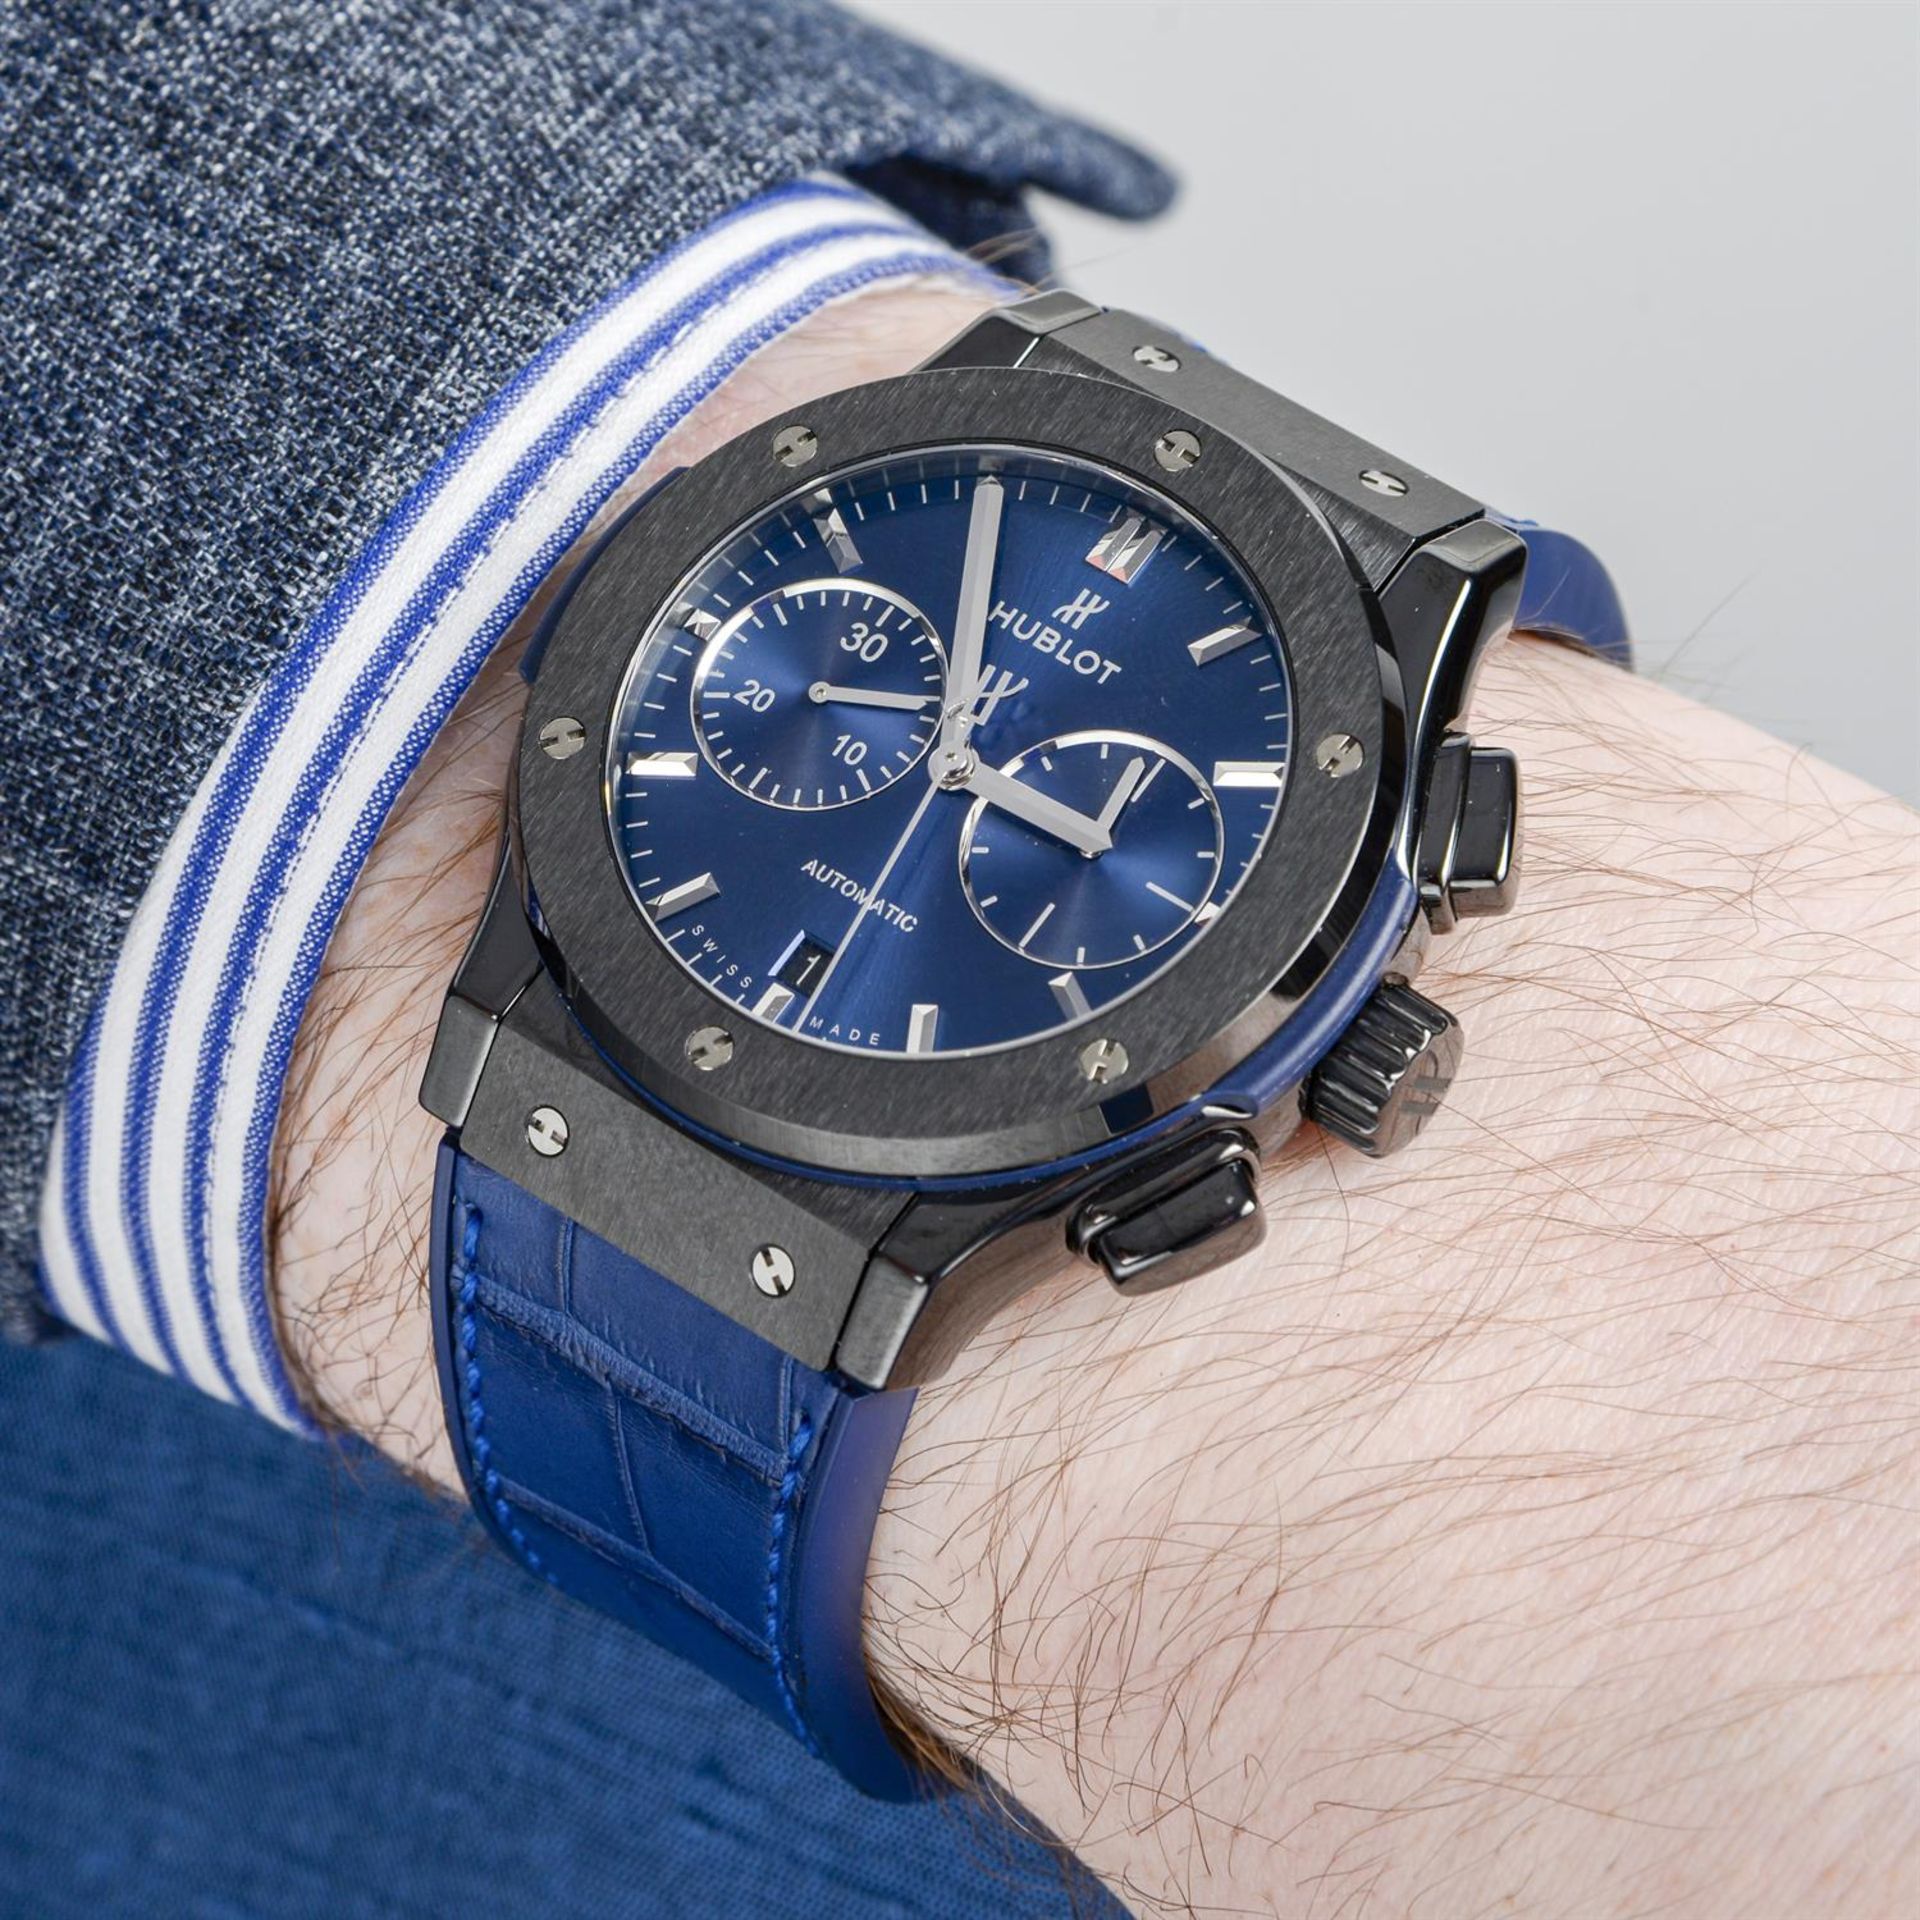 Hublot - a Classic Fusion watch, 46mm. - Image 6 of 7